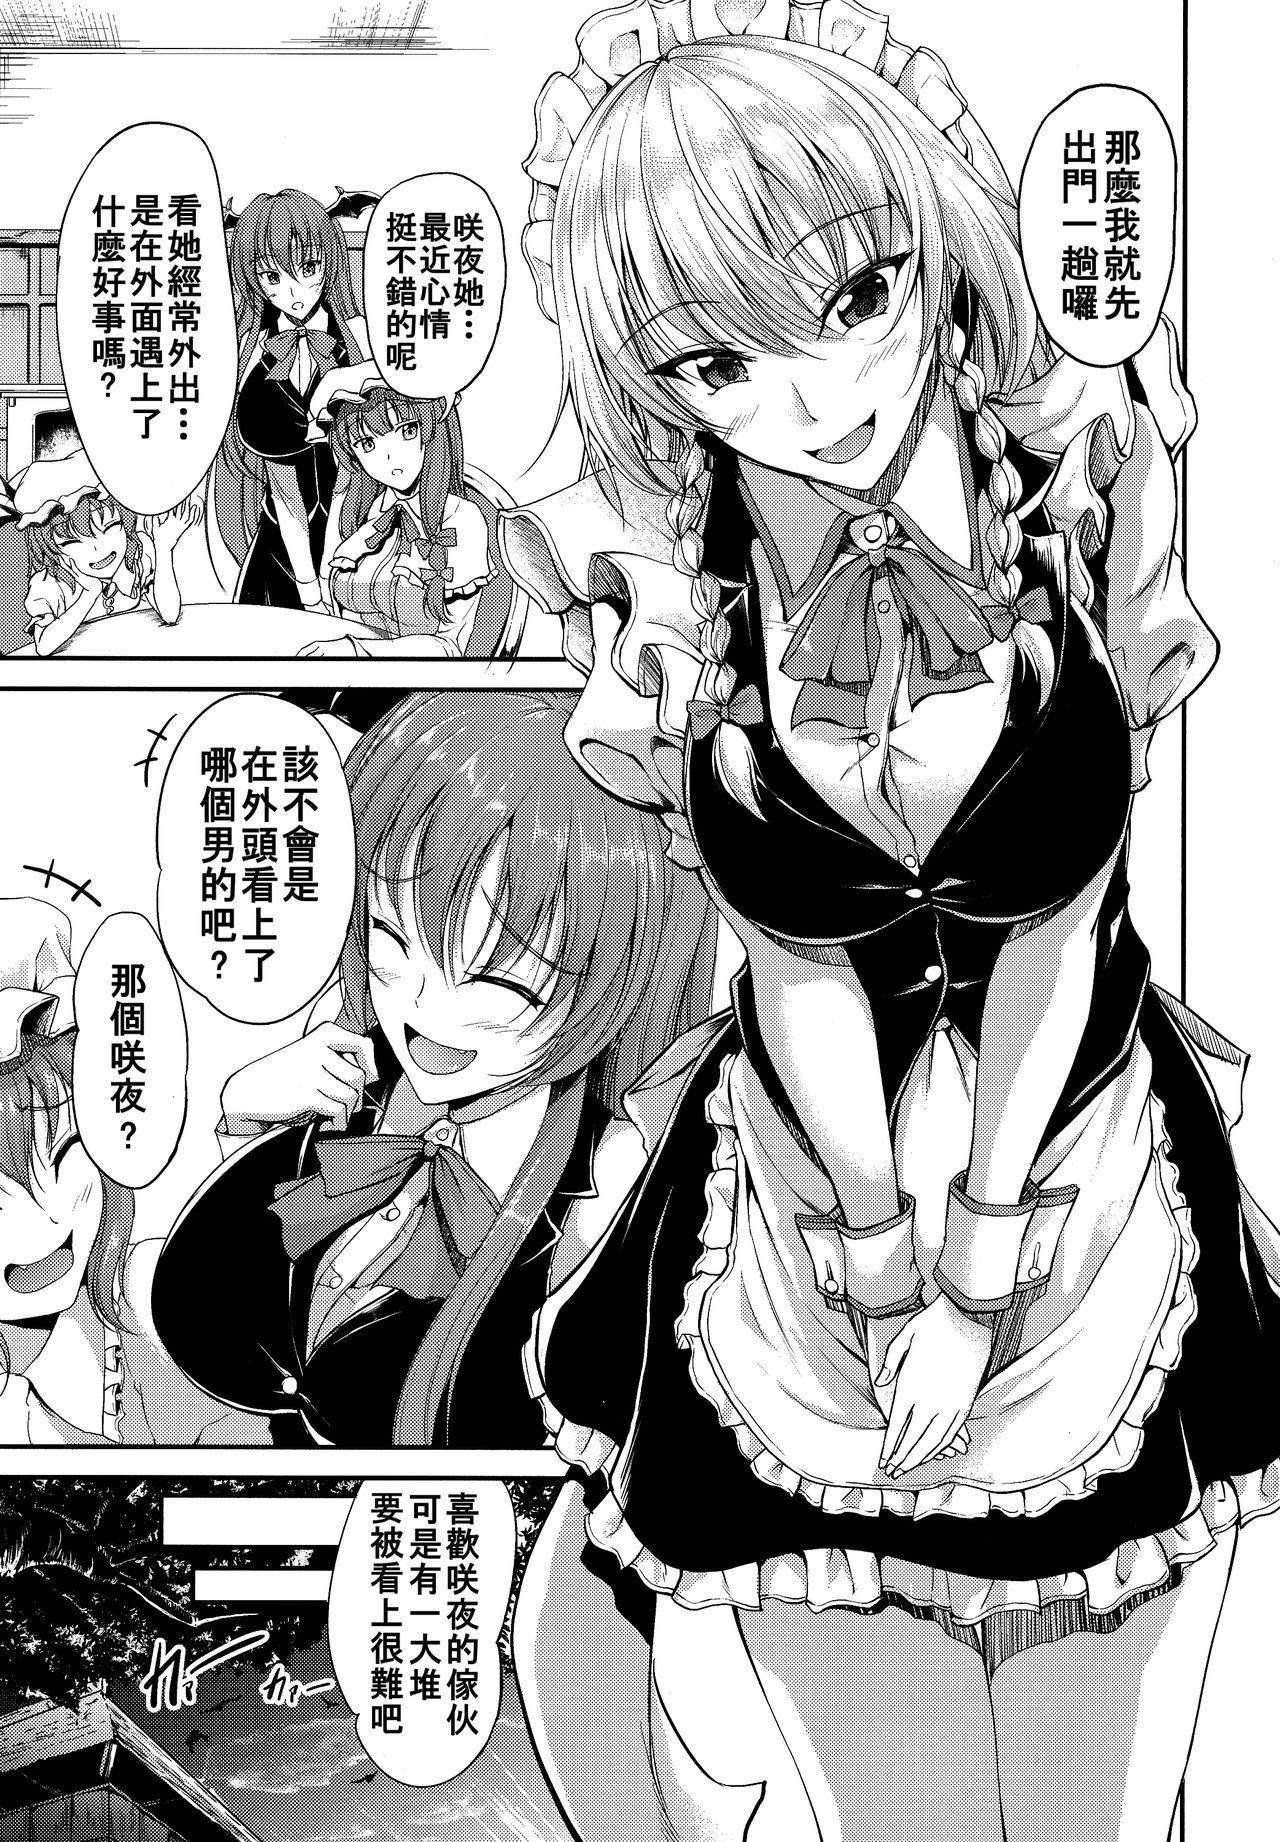 Pick Up Koumakan no Itazura Maid after - Touhou project Livecams - Page 3